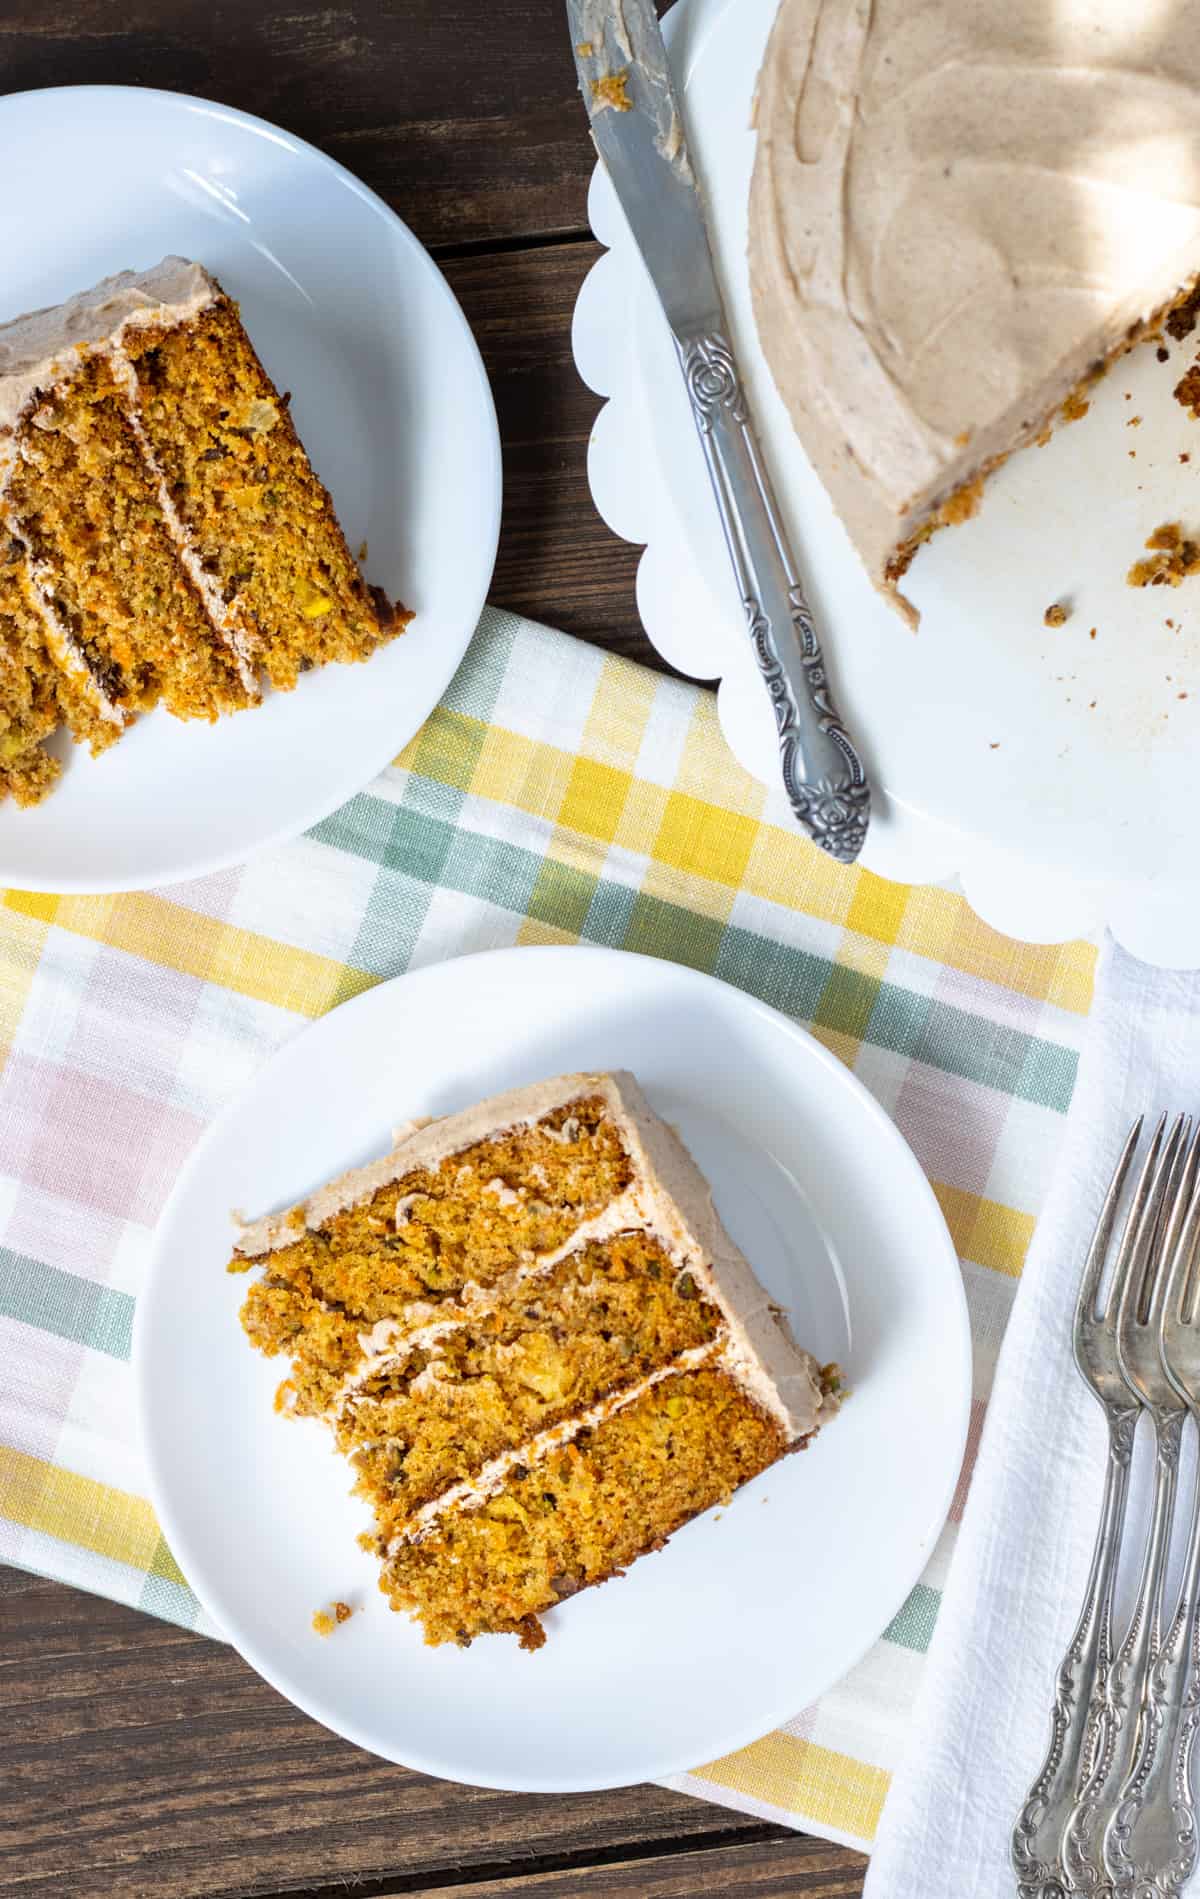 Carrot cake slices on two plates with the whole cake in the background with forks to the side.